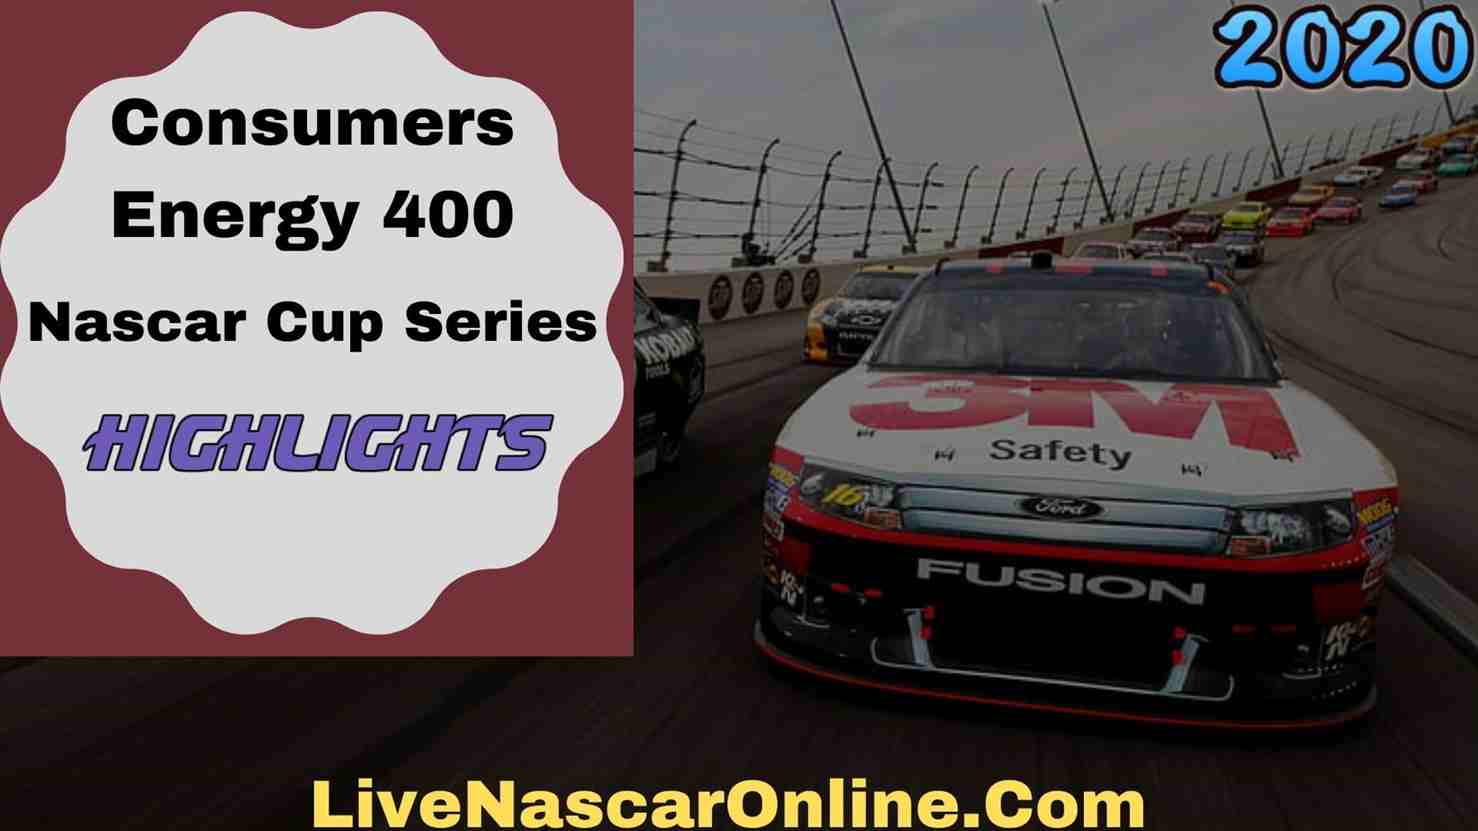 Consumers Energy 400 Nascar Cup Series Highlights 2020